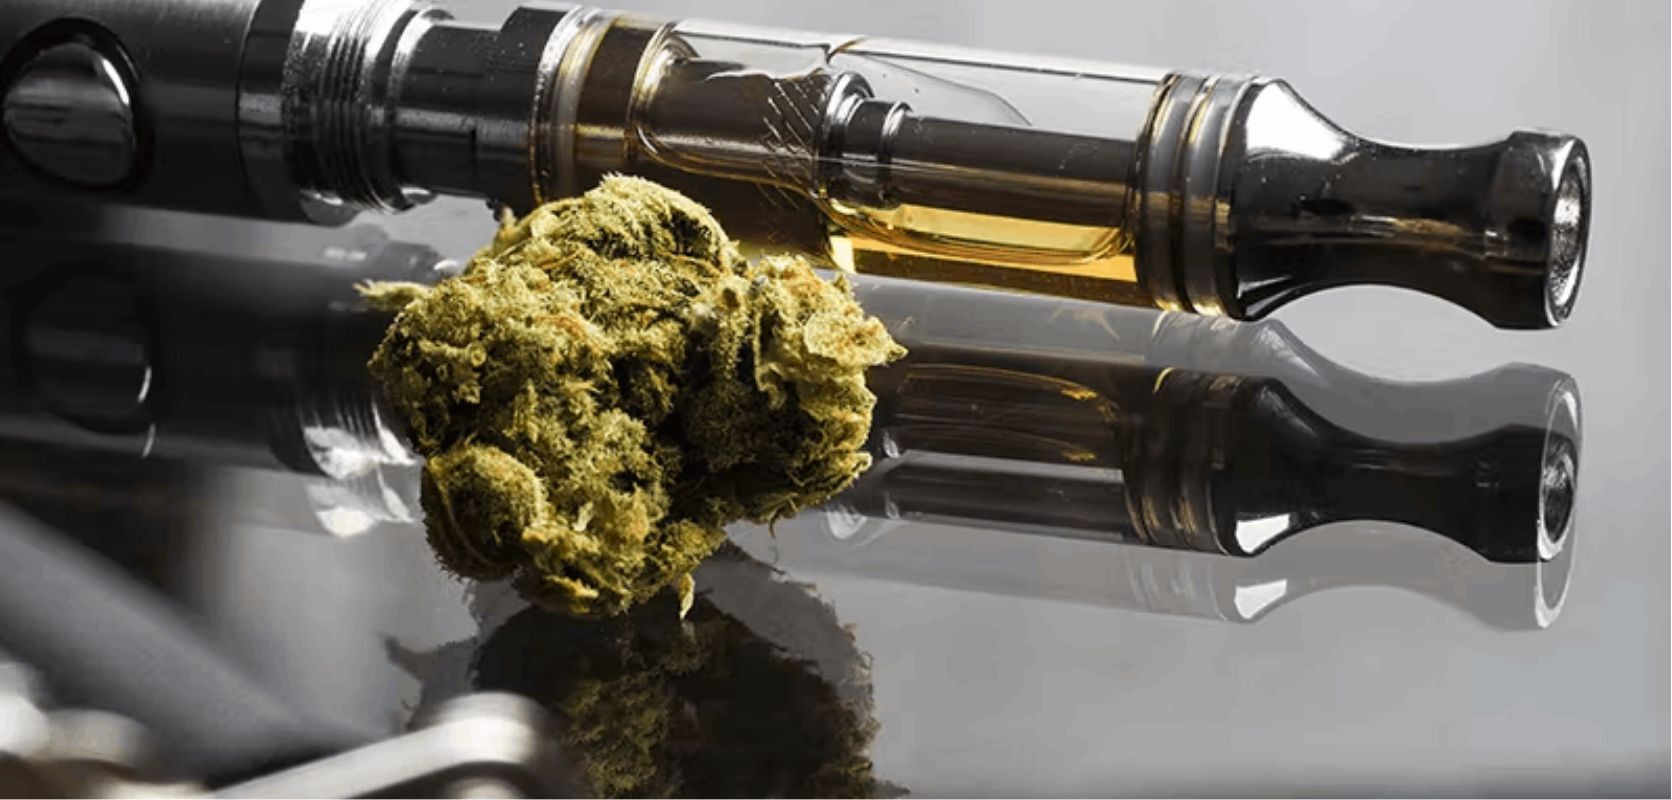 If you're looking to save money on value buds, you may have considered the option of purchasing bulk THC vape pens in Canada.